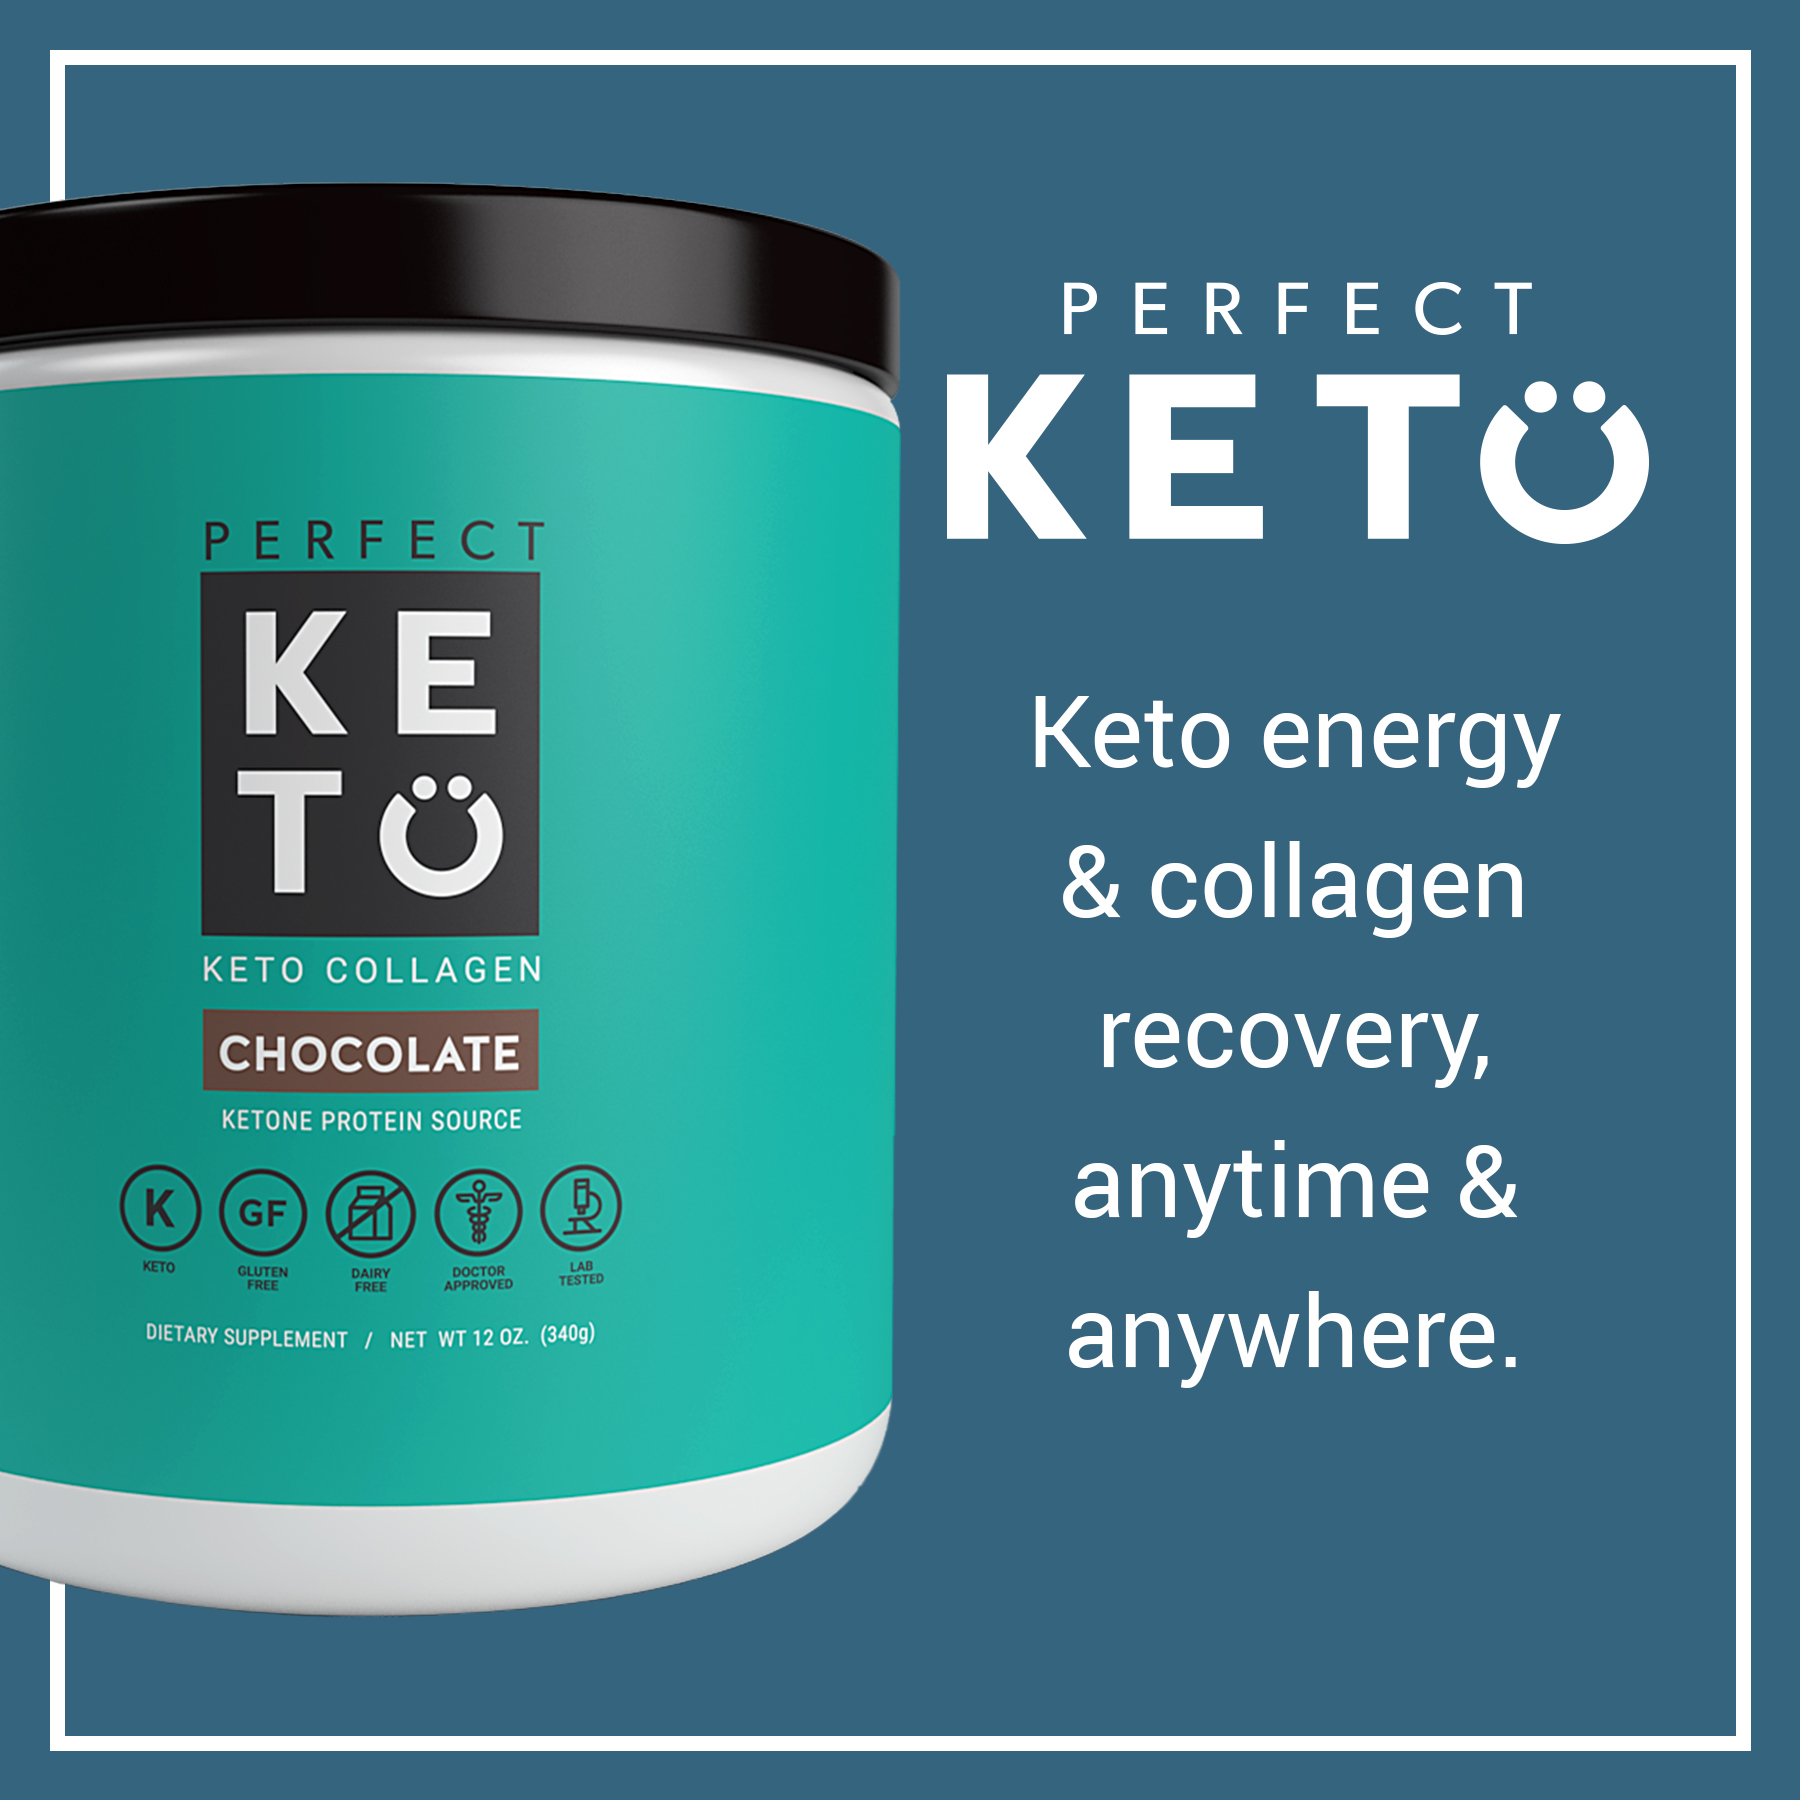 BE THE FIRST TO TRY PERFECT KETO COLLAGEN! GET 20% OFF! via Keto In The City